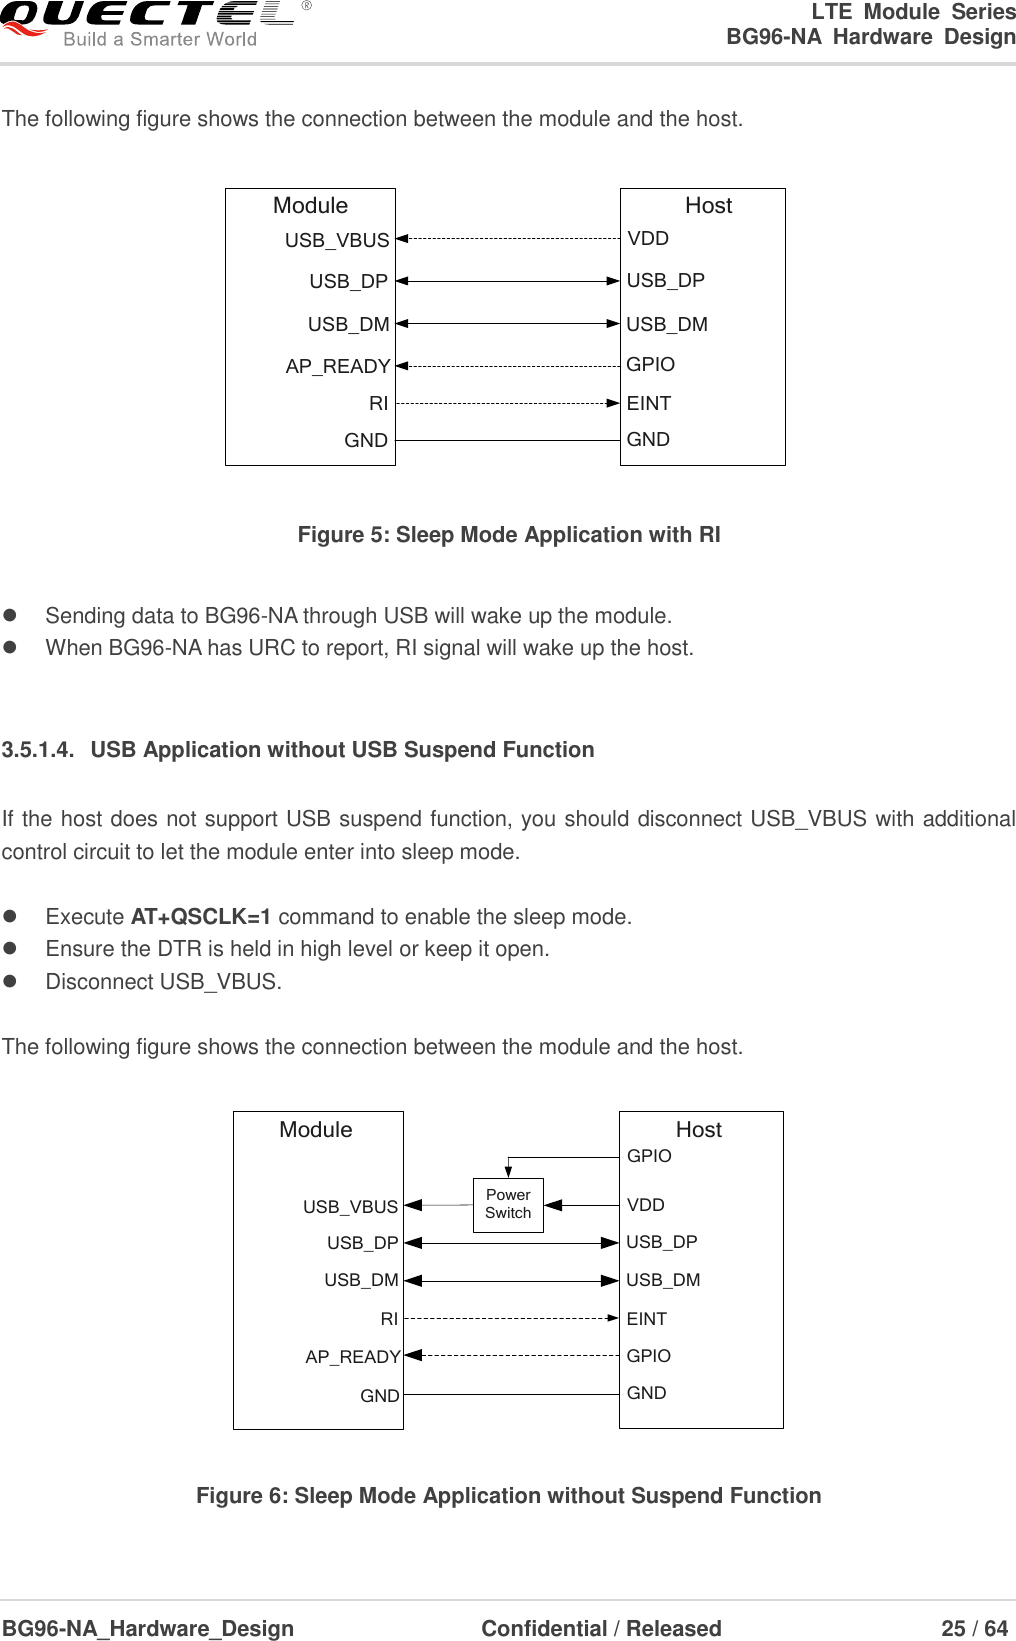 LTE  Module  Series                                                  BG96-NA  Hardware  Design  BG96-NA_Hardware_Design                              Confidential / Released                                  25 / 64    The following figure shows the connection between the module and the host. USB_VBUSUSB_DPUSB_DMAP_READYVDDUSB_DPUSB_DMGPIOModule HostGND GNDRI EINT Figure 5: Sleep Mode Application with RI    Sending data to BG96-NA through USB will wake up the module.     When BG96-NA has URC to report, RI signal will wake up the host.    3.5.1.4.  USB Application without USB Suspend Function If the host does not support USB suspend function, you should disconnect USB_VBUS with additional control circuit to let the module enter into sleep mode.    Execute AT+QSCLK=1 command to enable the sleep mode.   Ensure the DTR is held in high level or keep it open.   Disconnect USB_VBUS.  The following figure shows the connection between the module and the host. USB_VBUSUSB_DPUSB_DMAP_READYVDDUSB_DPUSB_DMGPIOModule HostRI EINTPower SwitchGPIOGND GND Figure 6: Sleep Mode Application without Suspend Function 